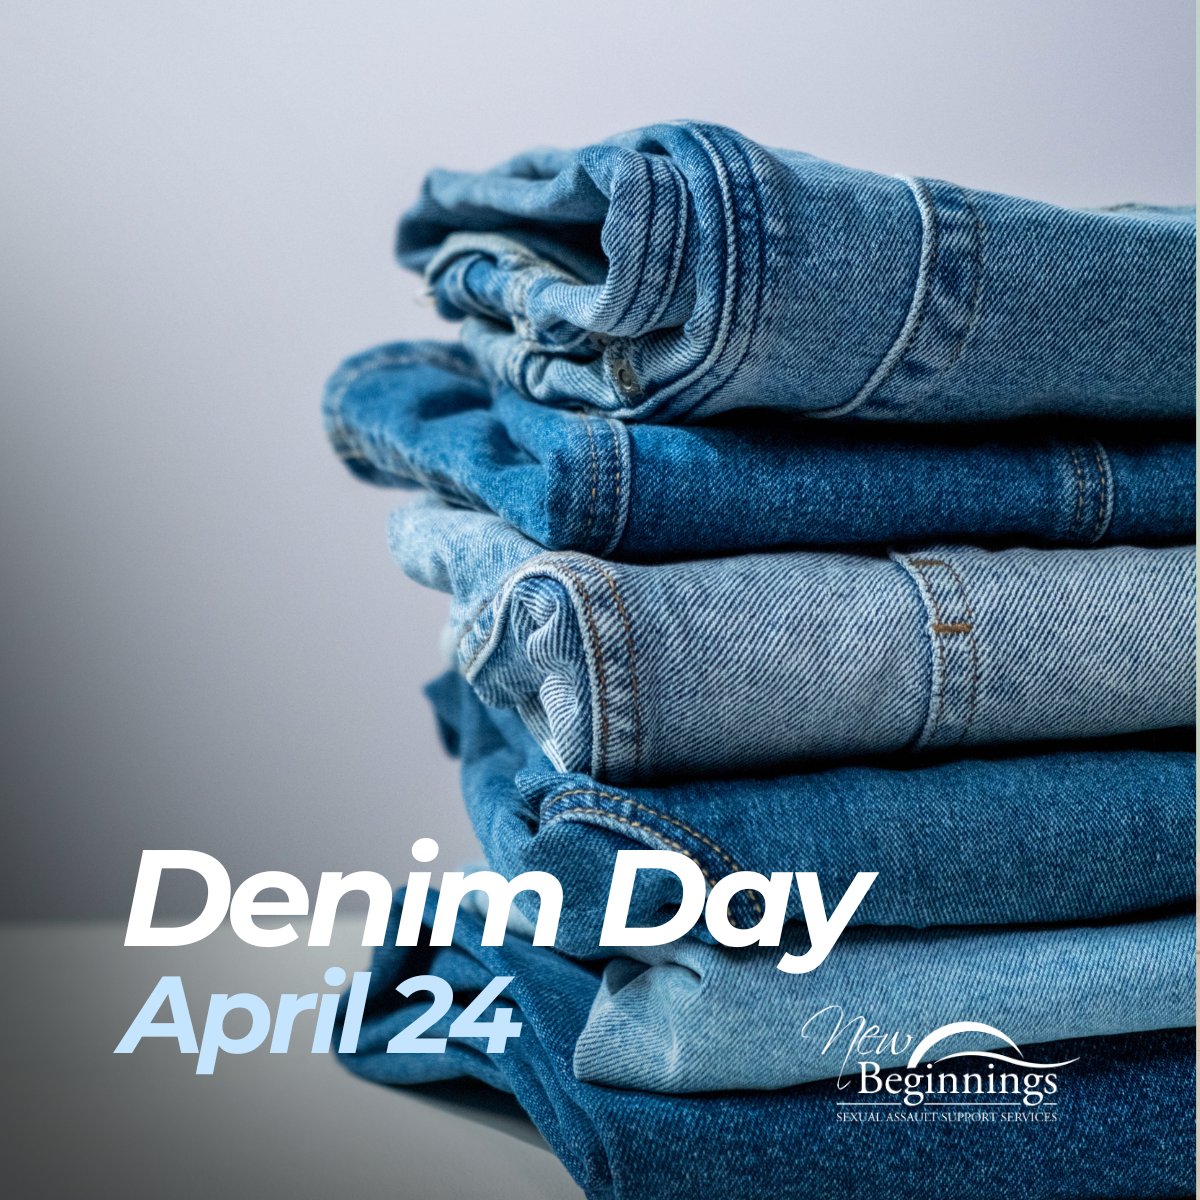 Today is Denim Day! 👖 Join us in wearing denim to raise awareness and show support for survivors of sexual assault. Let's stand together to challenge victim-blaming attitudes and promote a culture of consent and respect. #DenimDay #SupportSurvivors #EndSexualViolence